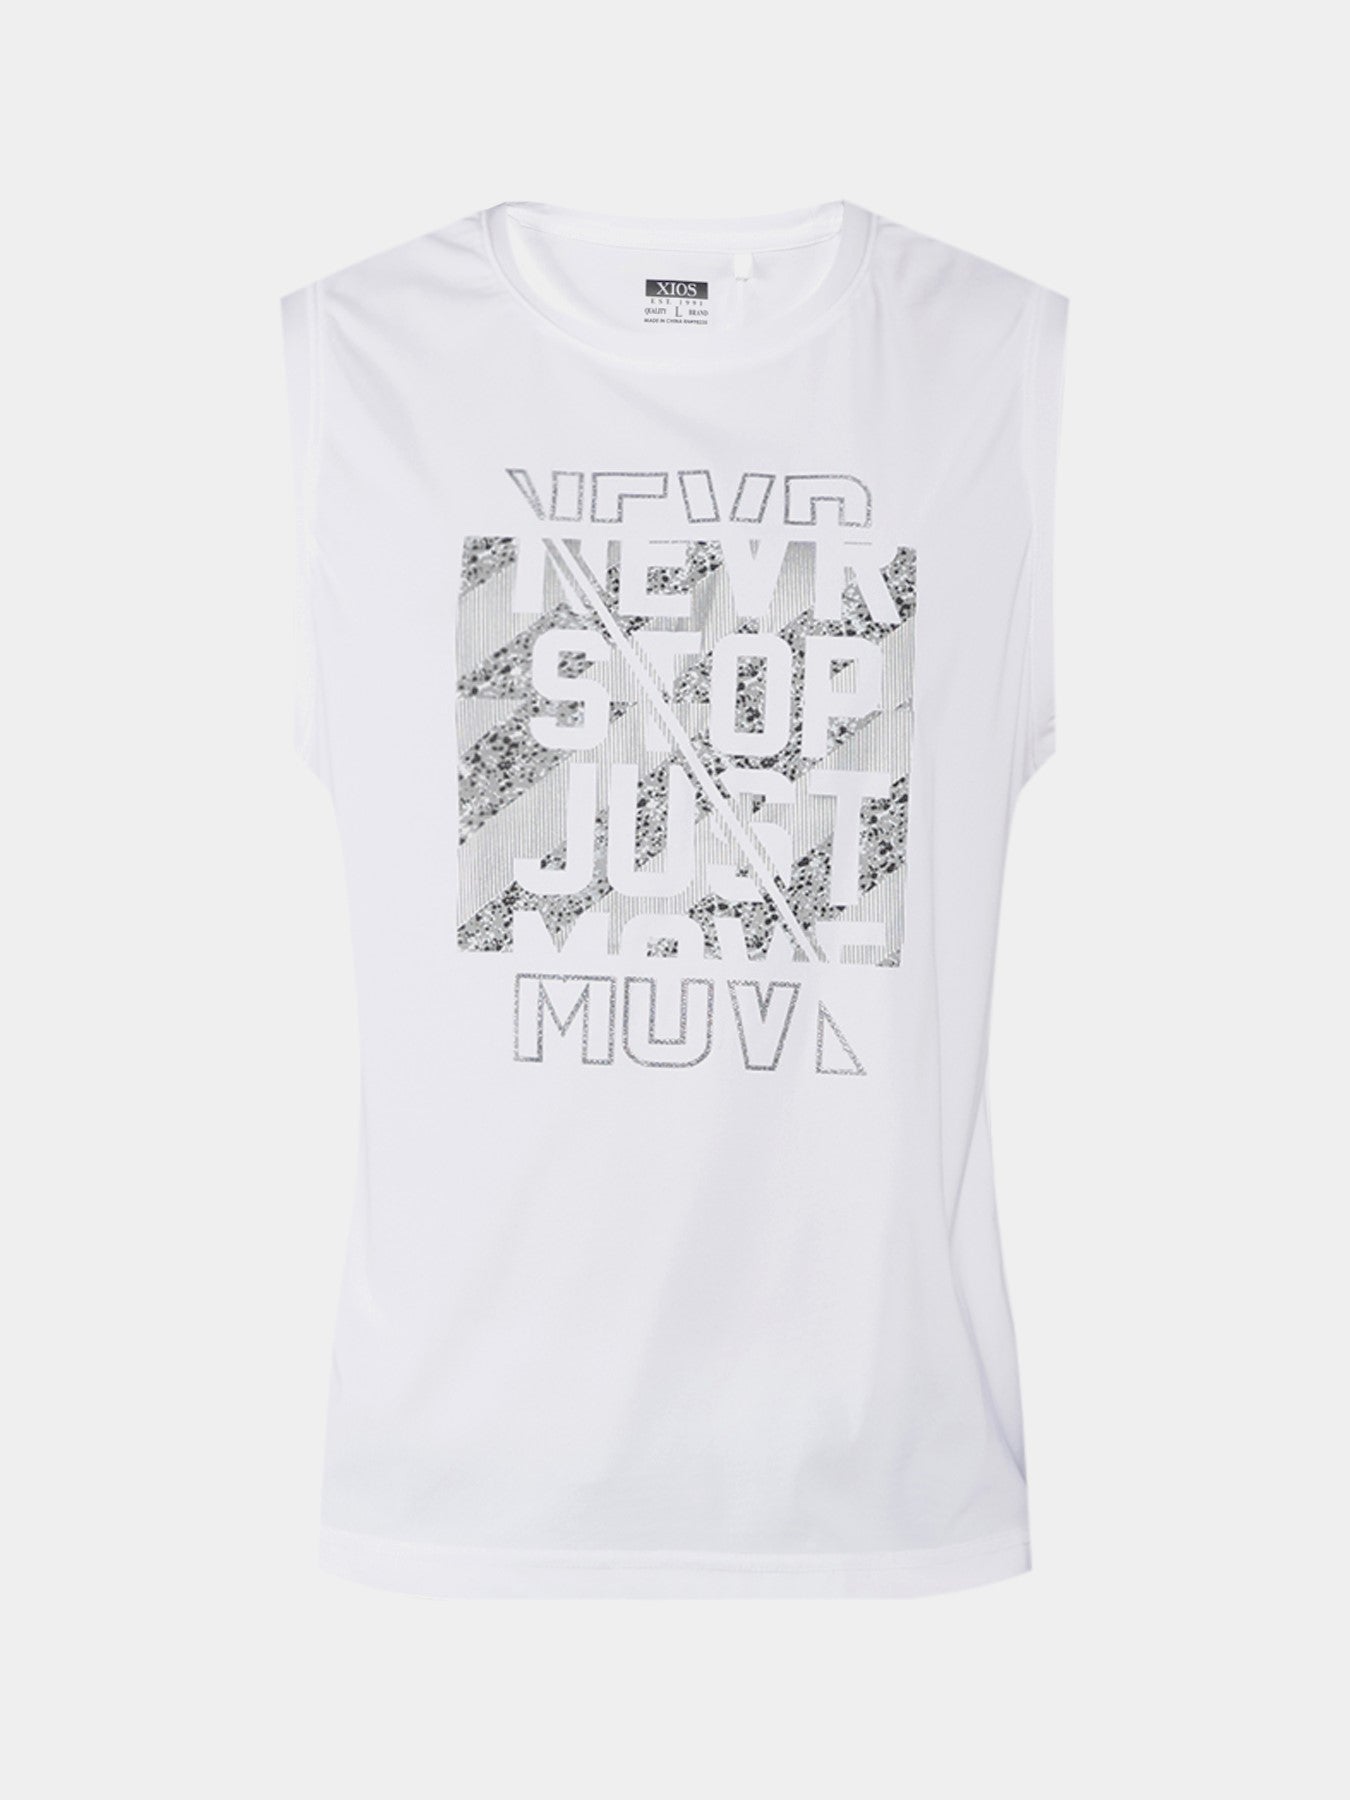 "Never Stop Just Move" Muscle Shirt - XIOS America